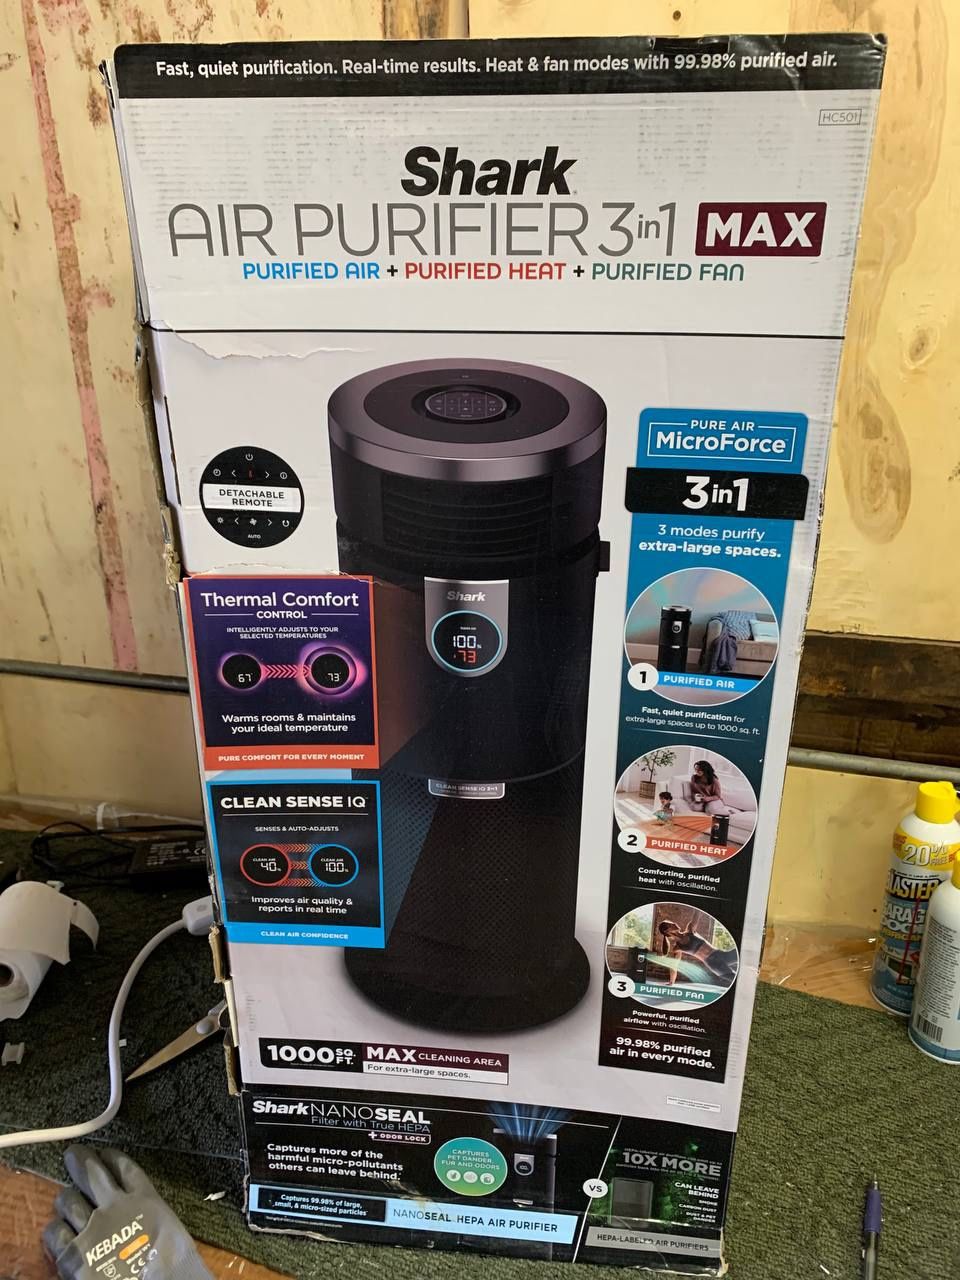 Shark - 3-in-1 Max Air Purifier, Heater & Fan with NanoSeal HEPA, Cleansense IQ, Odor Lock, for 1000 Sq. Ft - Charcoal Grey [HC501]